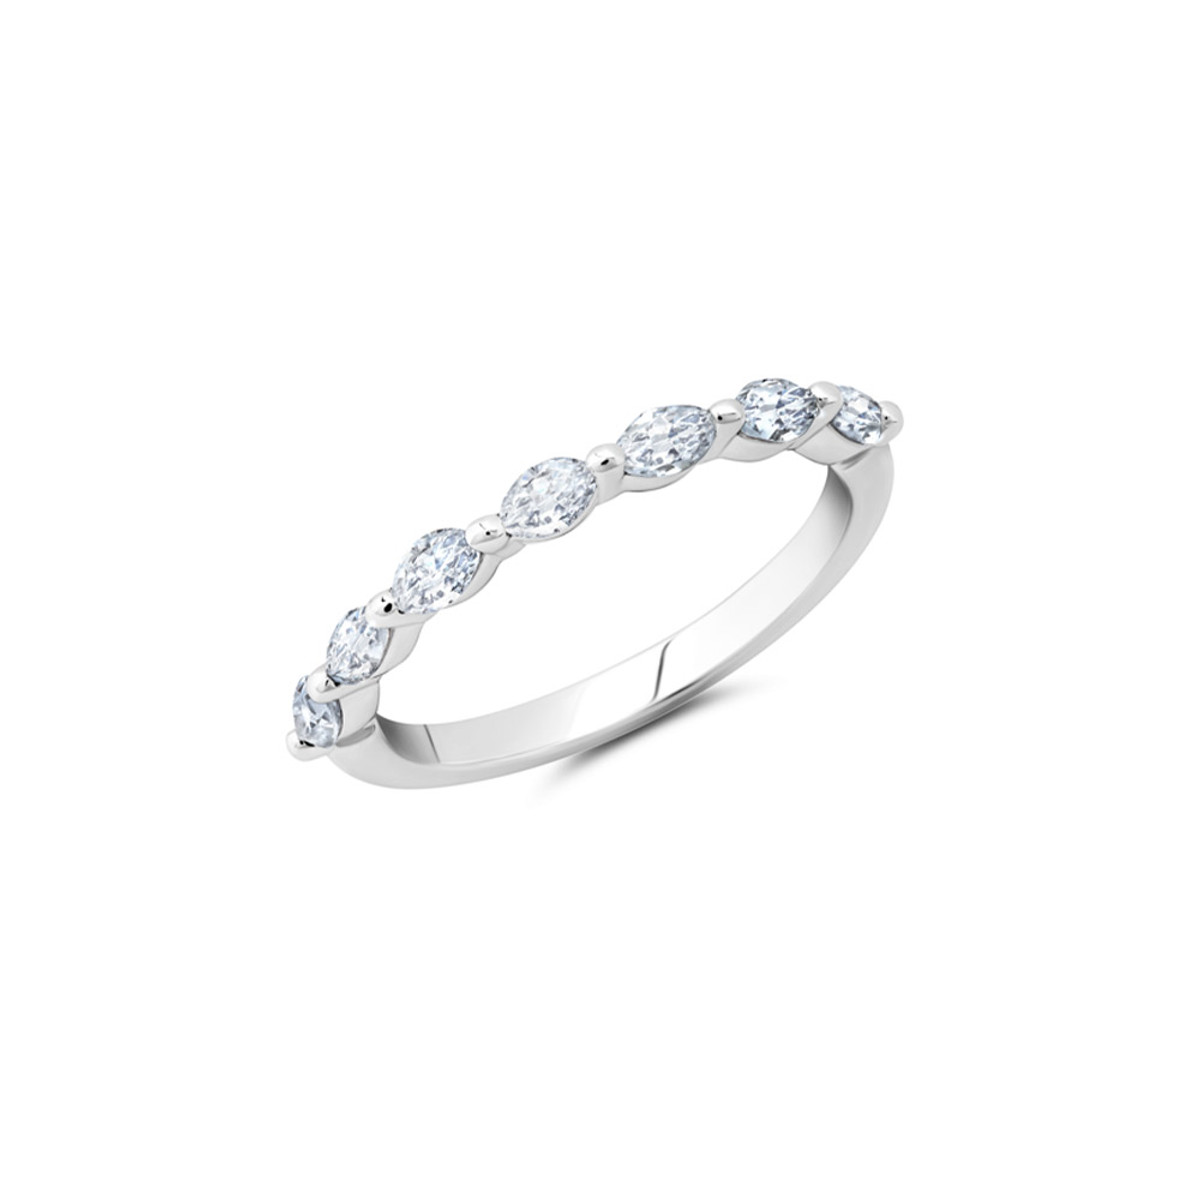 Peter Storm 14K White Gold Marquise Diamond Band-39060